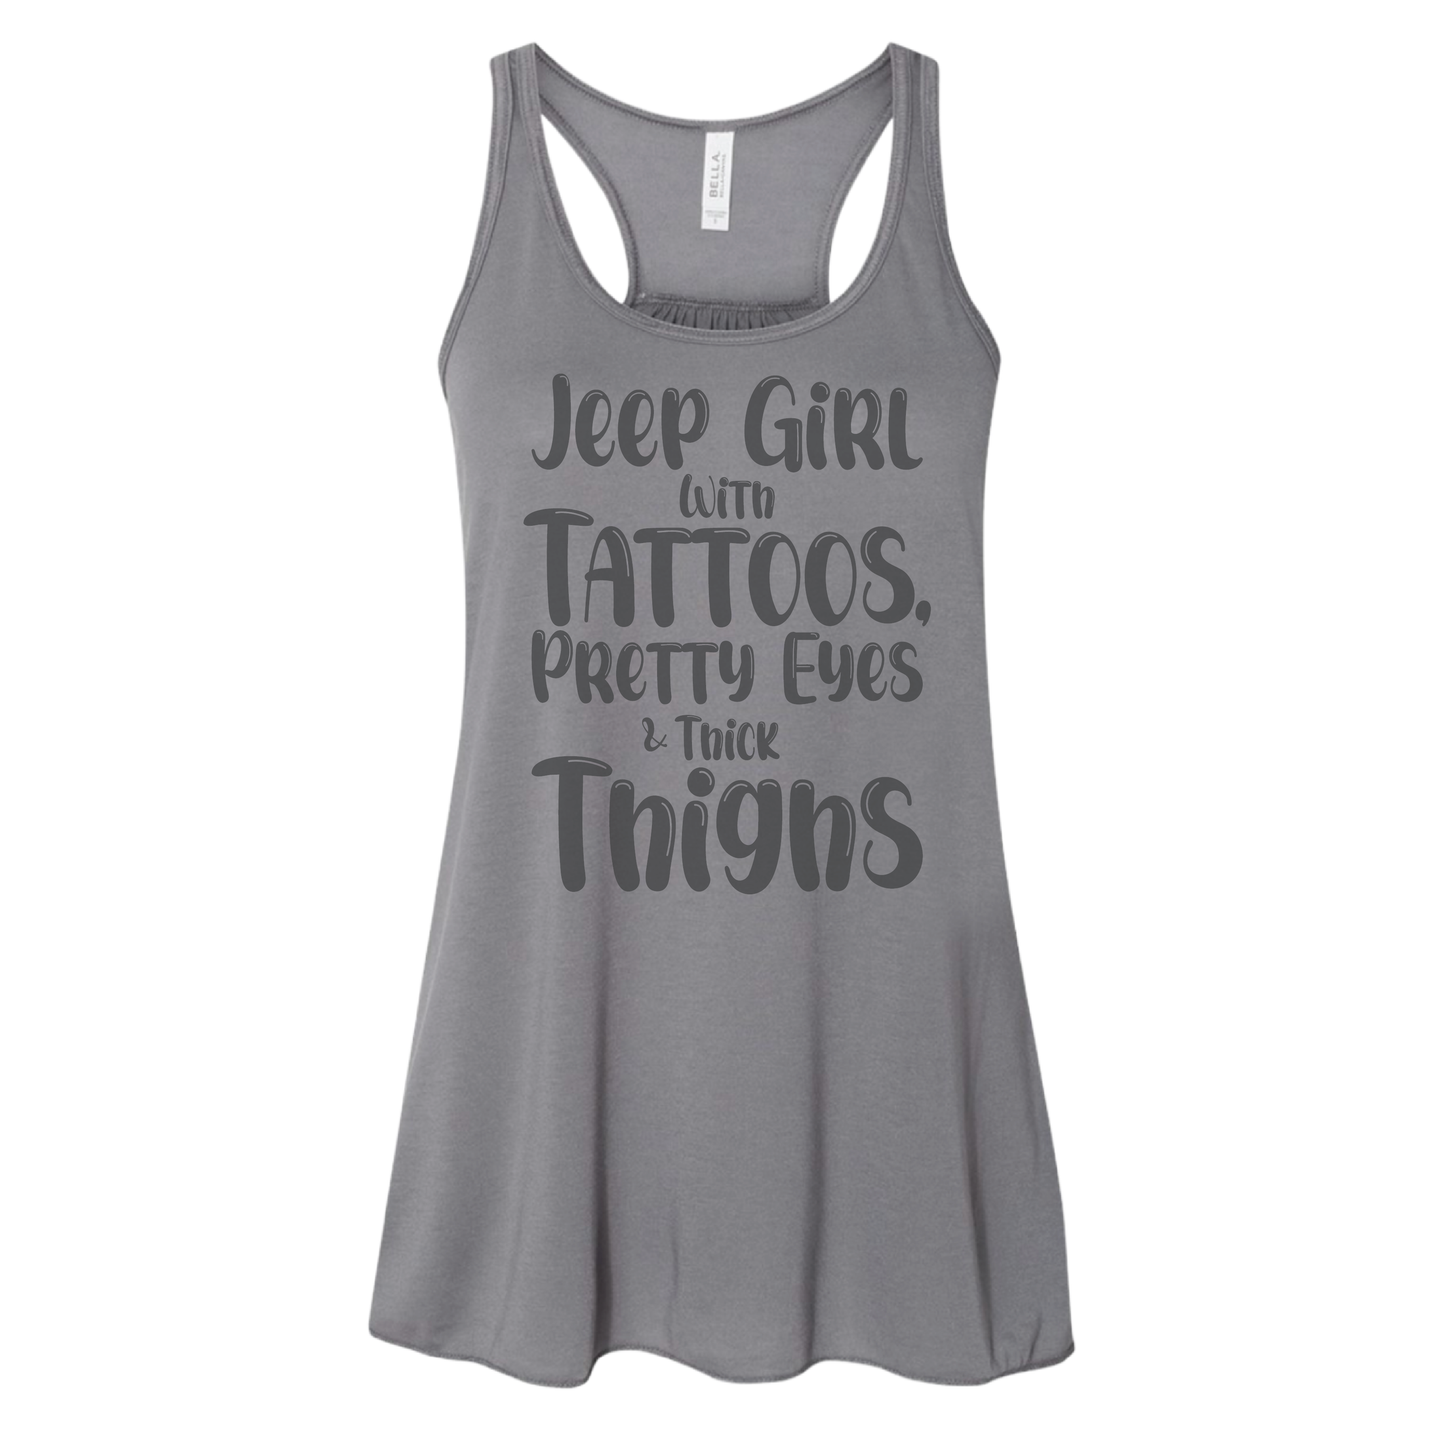 Pretty Eyes & Thick Thighs - Shirt, Tank Top, Long Sleeve or Hoodie - Available in Multiple Colors